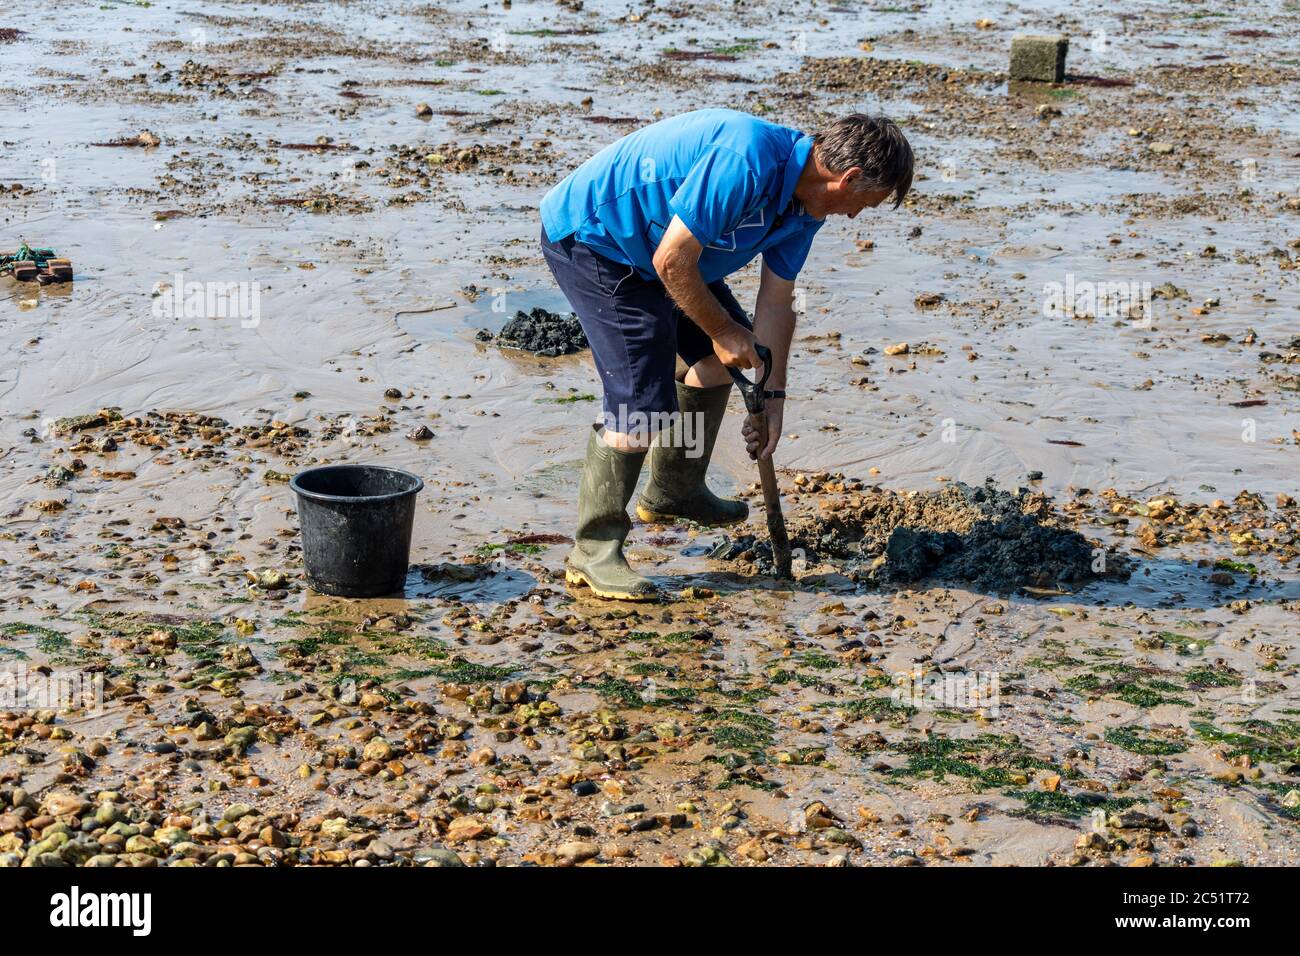 Man digging on beach for lug worms Stock Photo